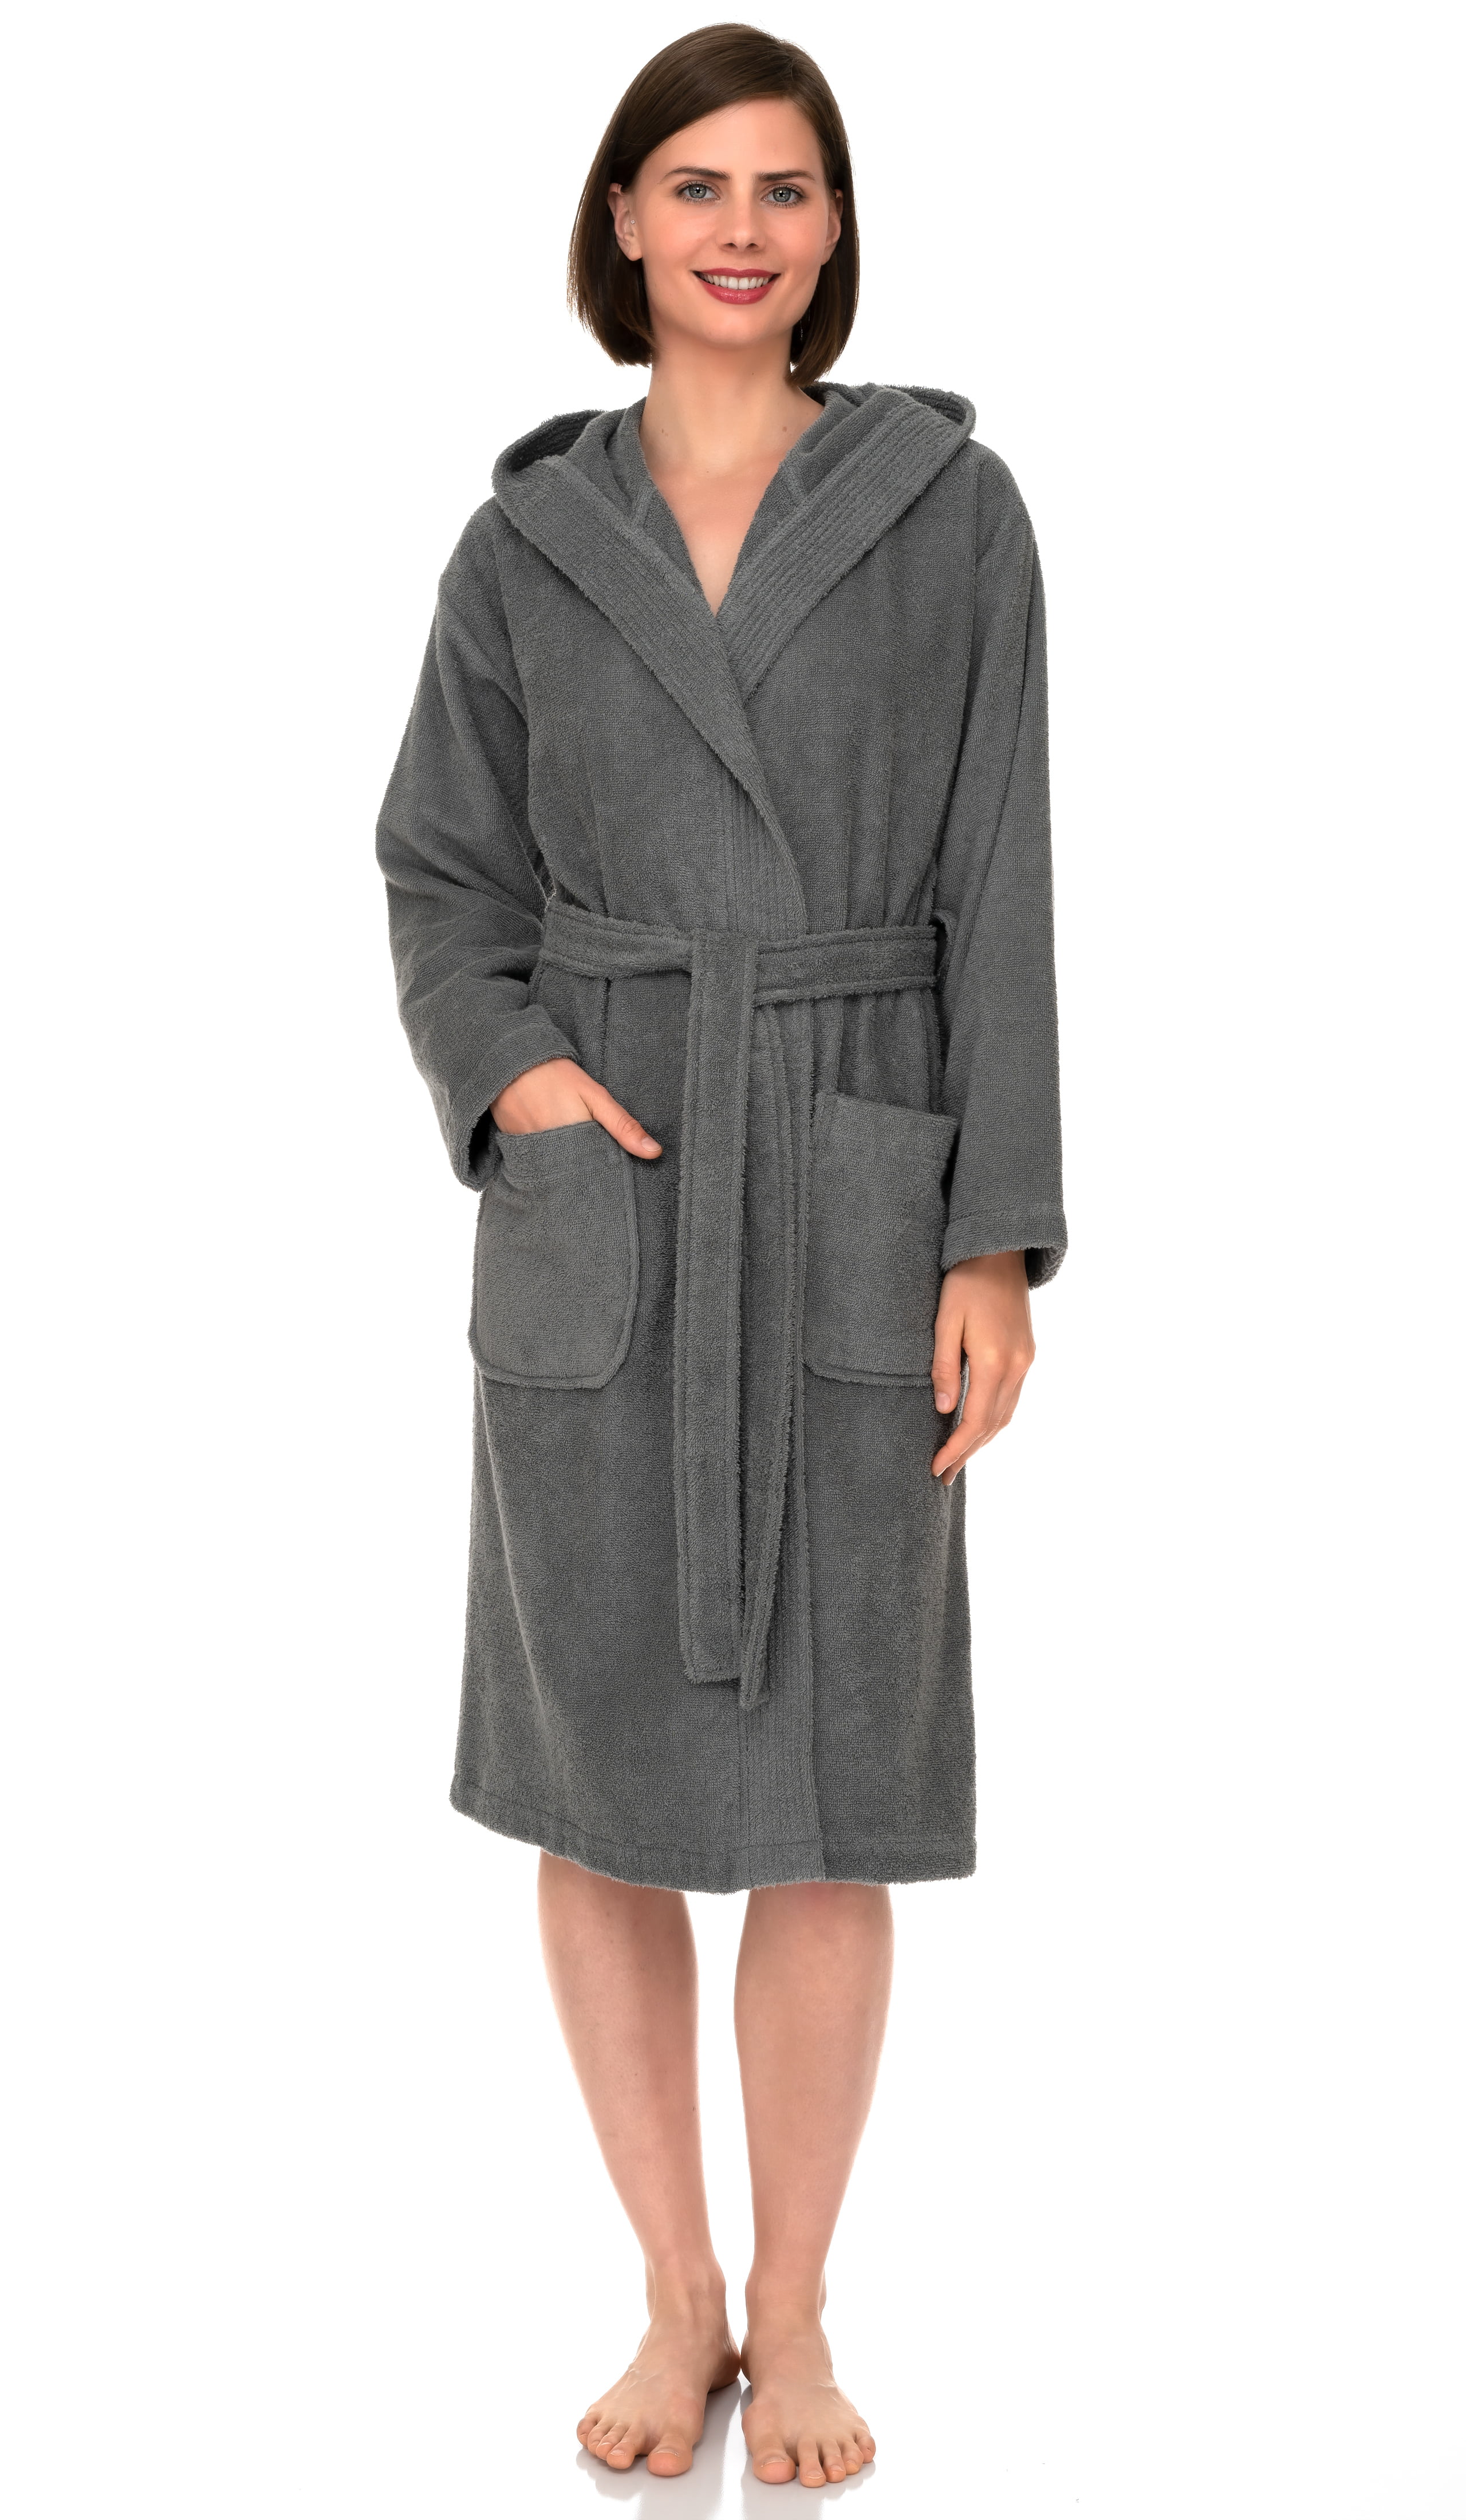 TowelSelections Men’s Hooded Robe Turkish Cotton Terry Cloth Bathrobe